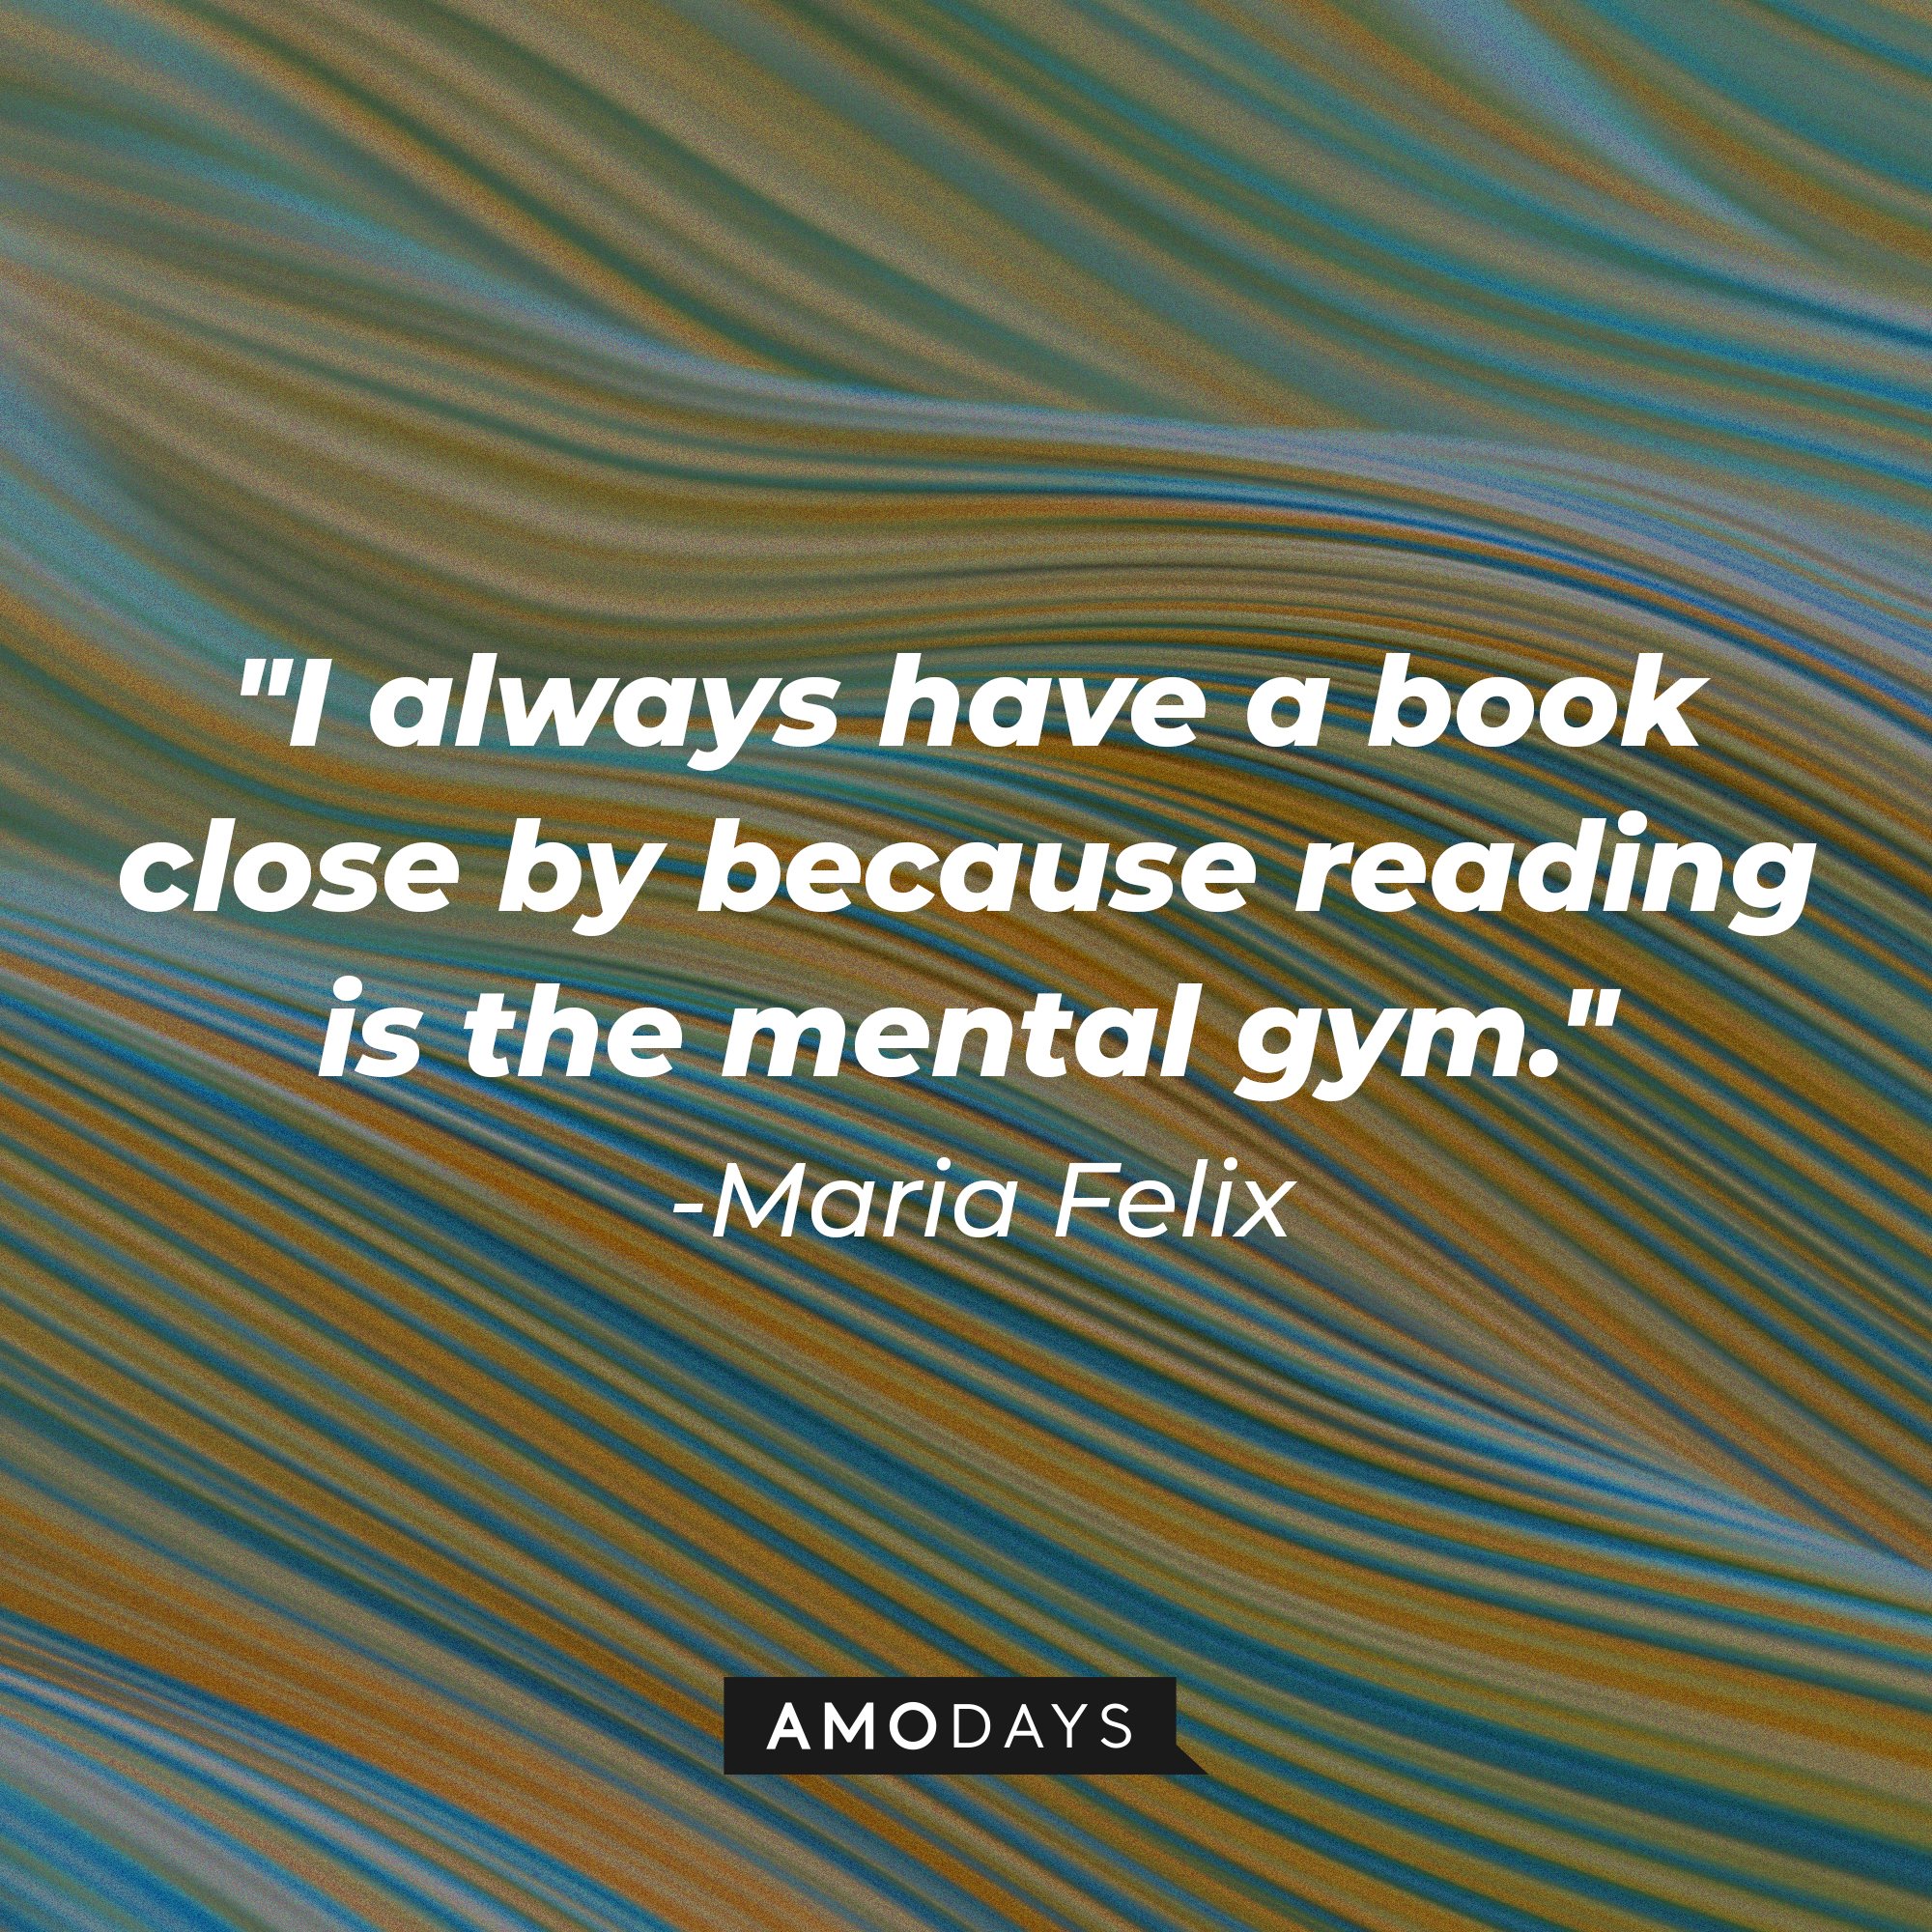 Maria Felix’s quote: "I always have a book close by because reading is the mental gym." | Image: AmoDays